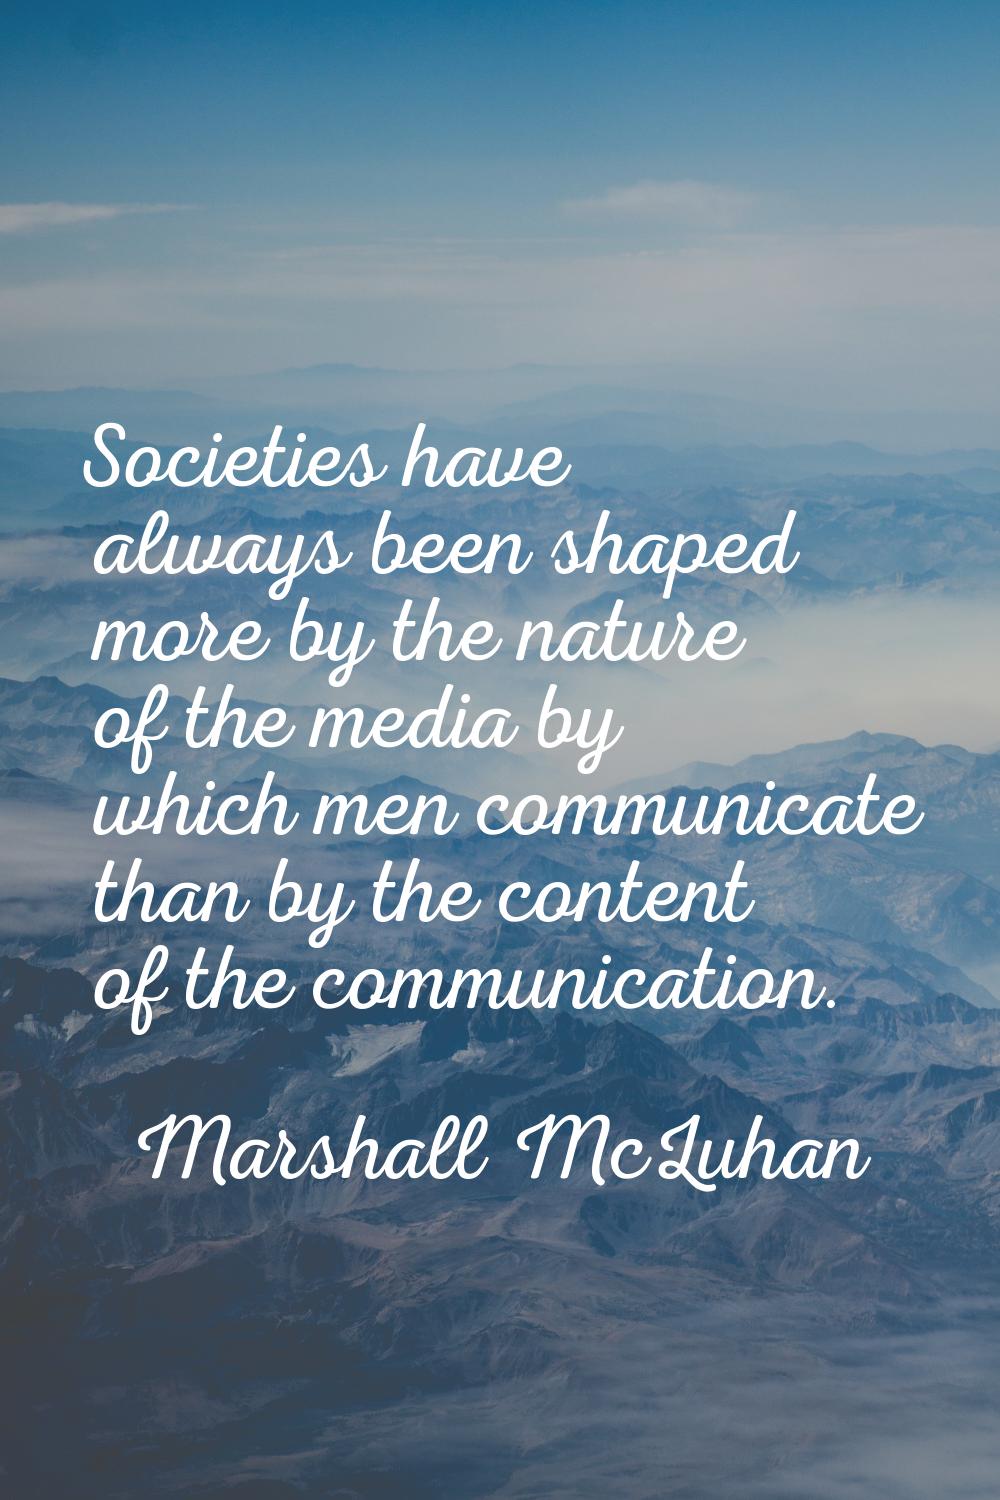 Societies have always been shaped more by the nature of the media by which men communicate than by 